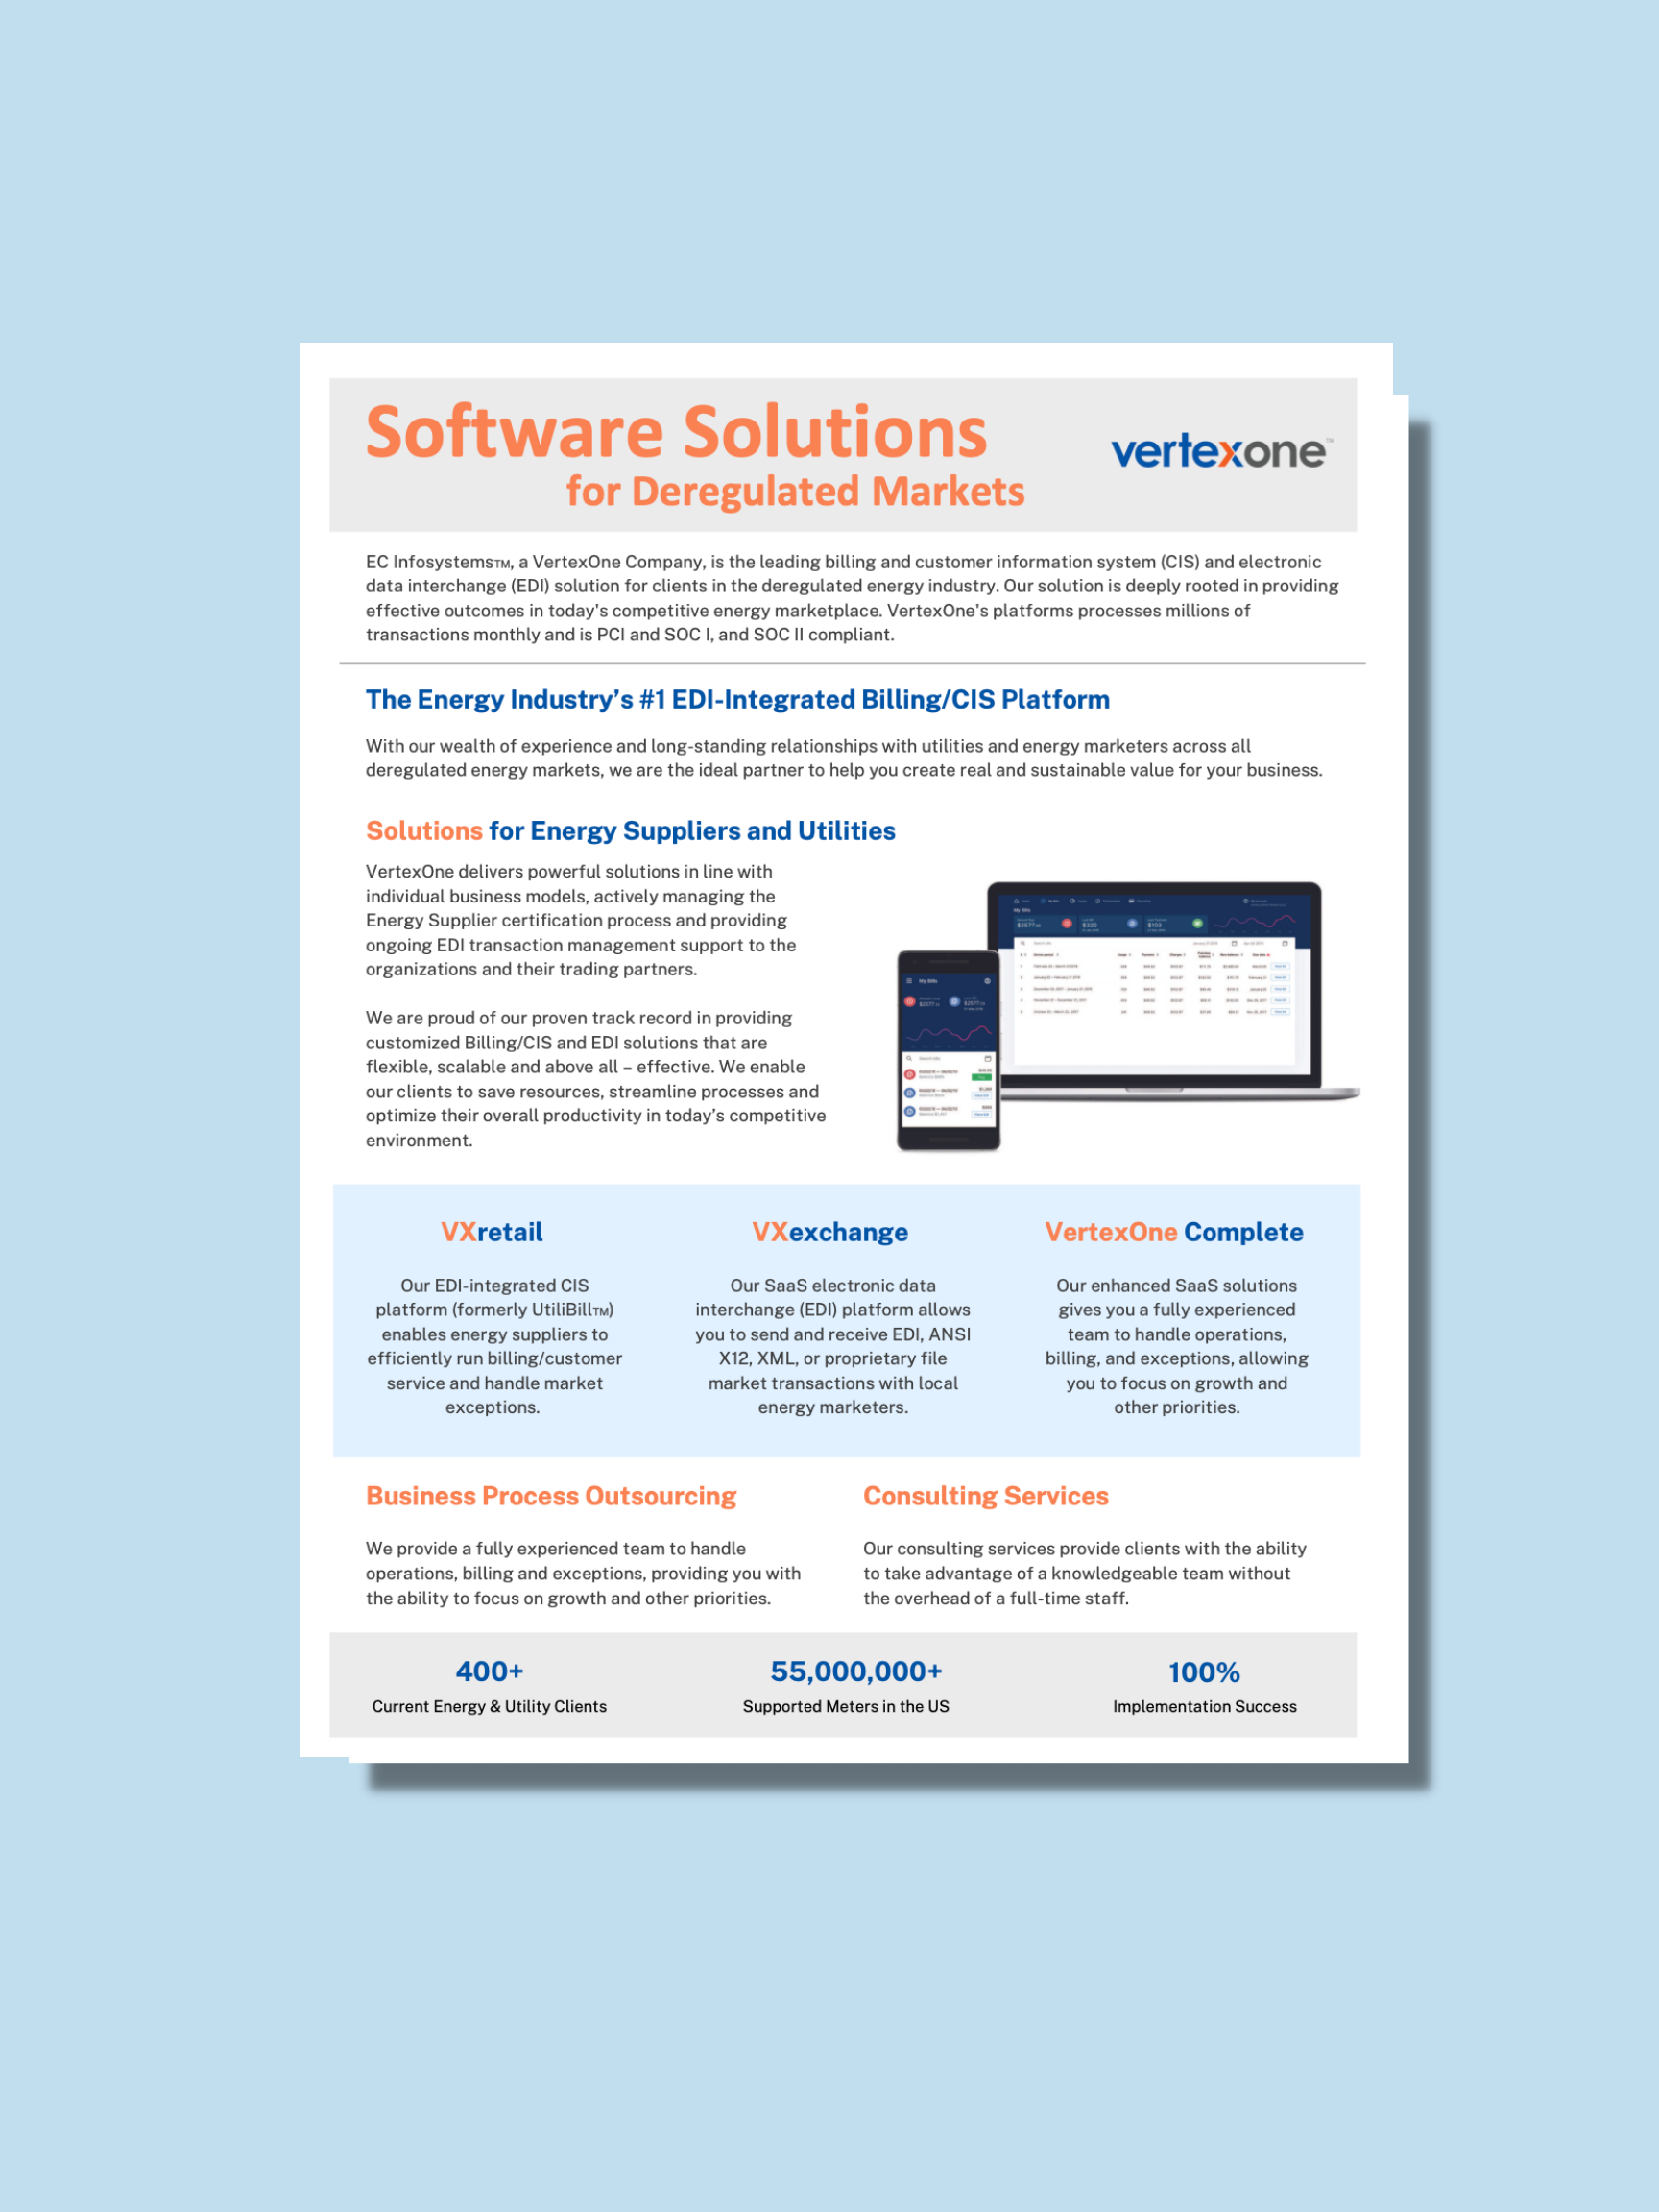 VertexOne Solutions for the Deregulated and Retail Market Brochure